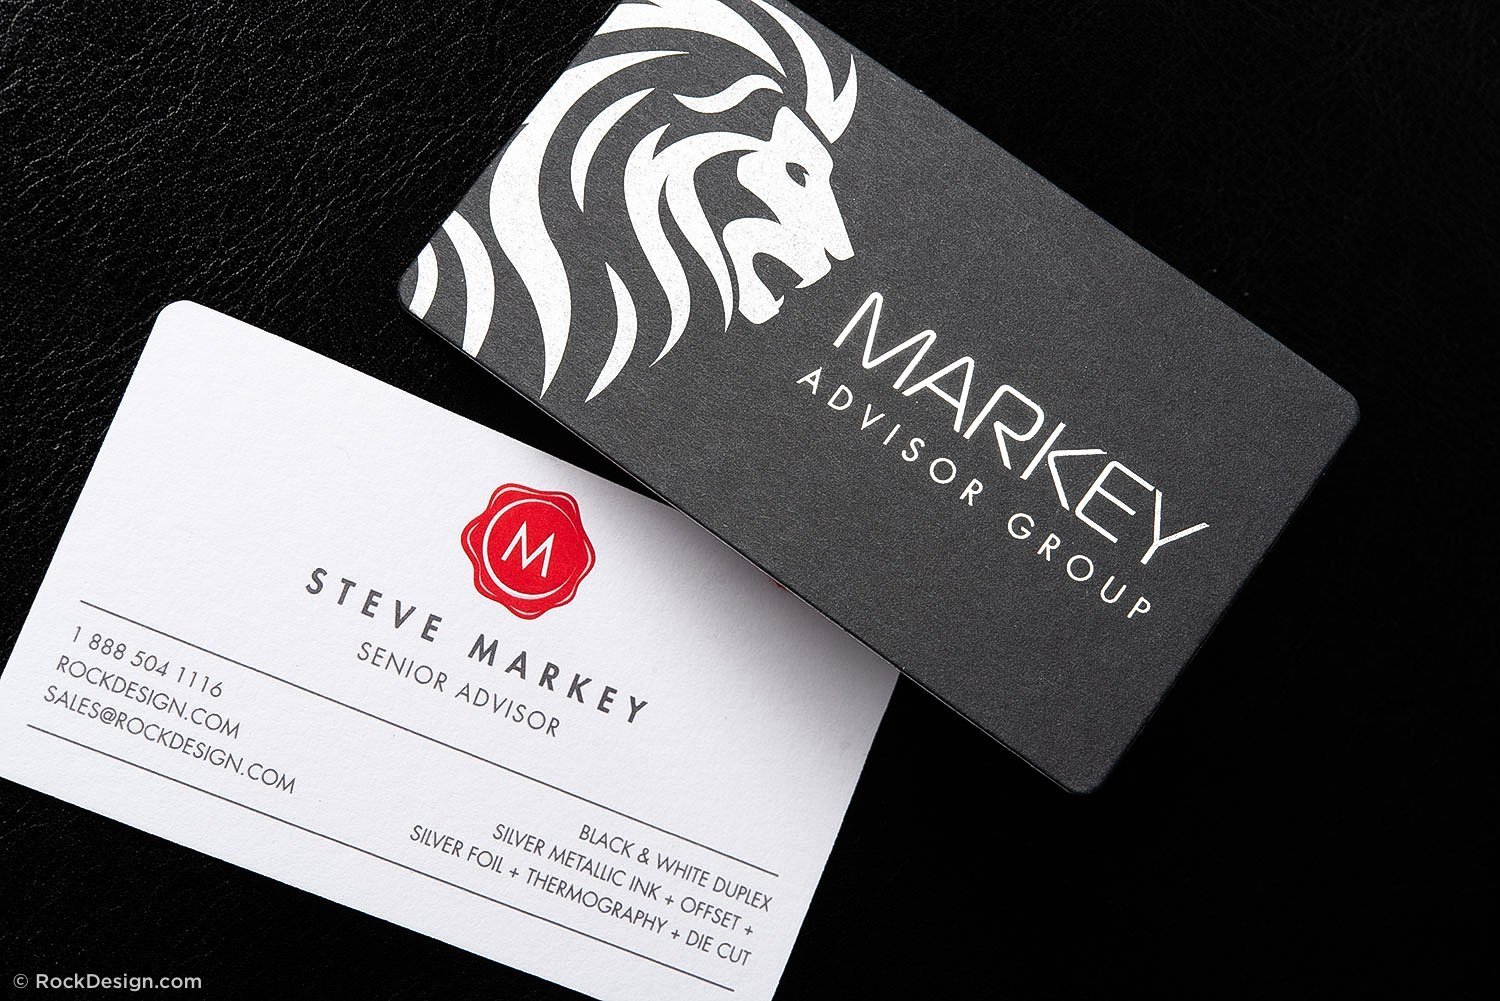 Black and White Business Cards New Professional Black and White Business Card with Silver Print and thermography – Markey Advisor Group